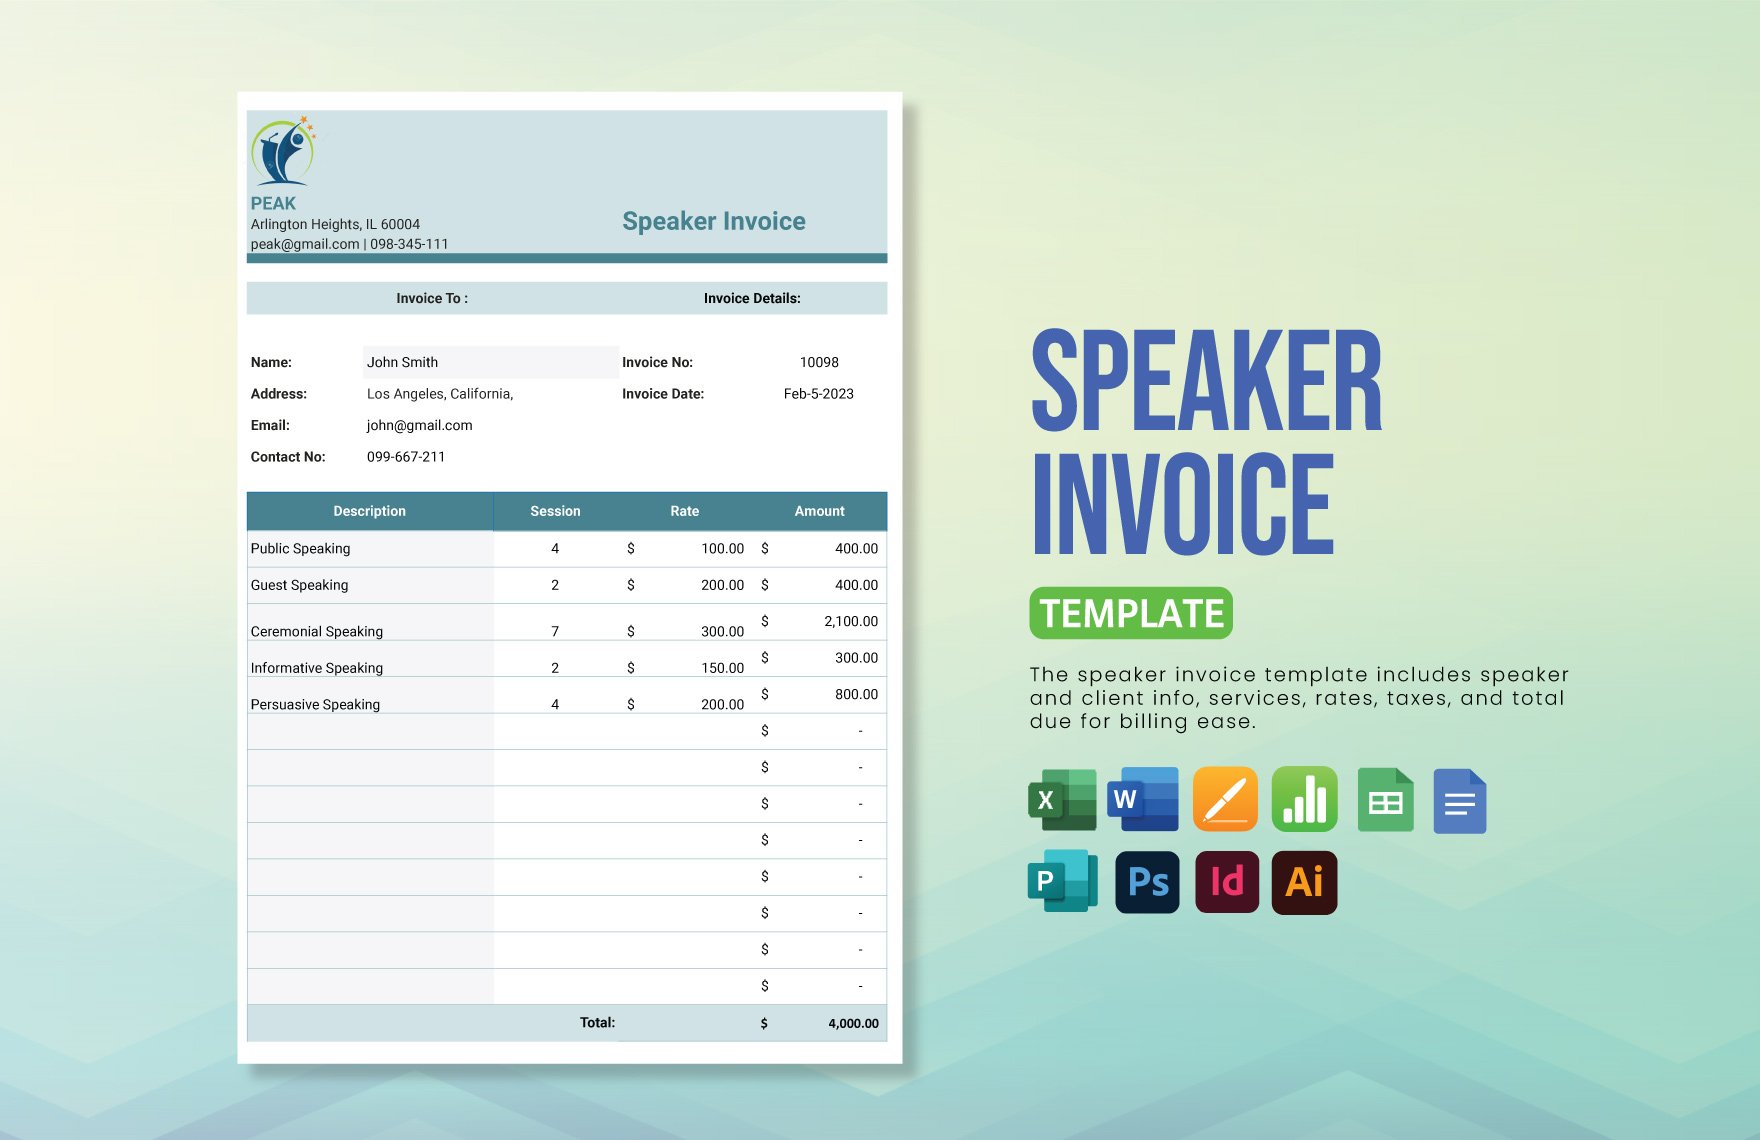 Speaker Invoice Template in Word, Google Docs, Excel, PDF, Google Sheets, Illustrator, PSD, Apple Pages, InDesign, Apple Numbers